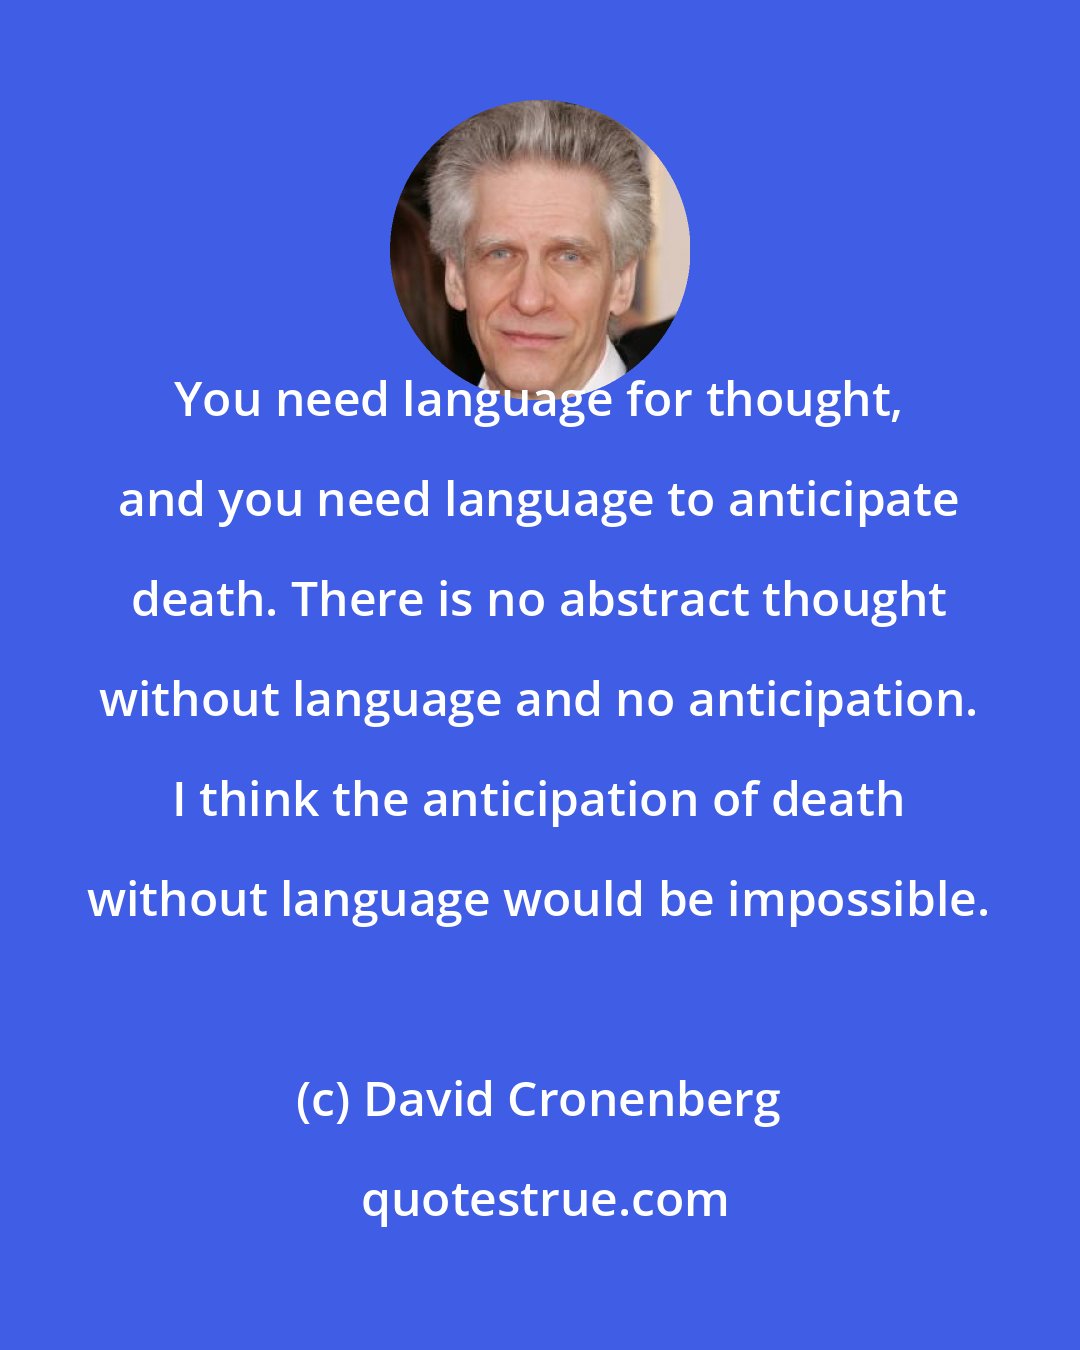 David Cronenberg: You need language for thought, and you need language to anticipate death. There is no abstract thought without language and no anticipation. I think the anticipation of death without language would be impossible.